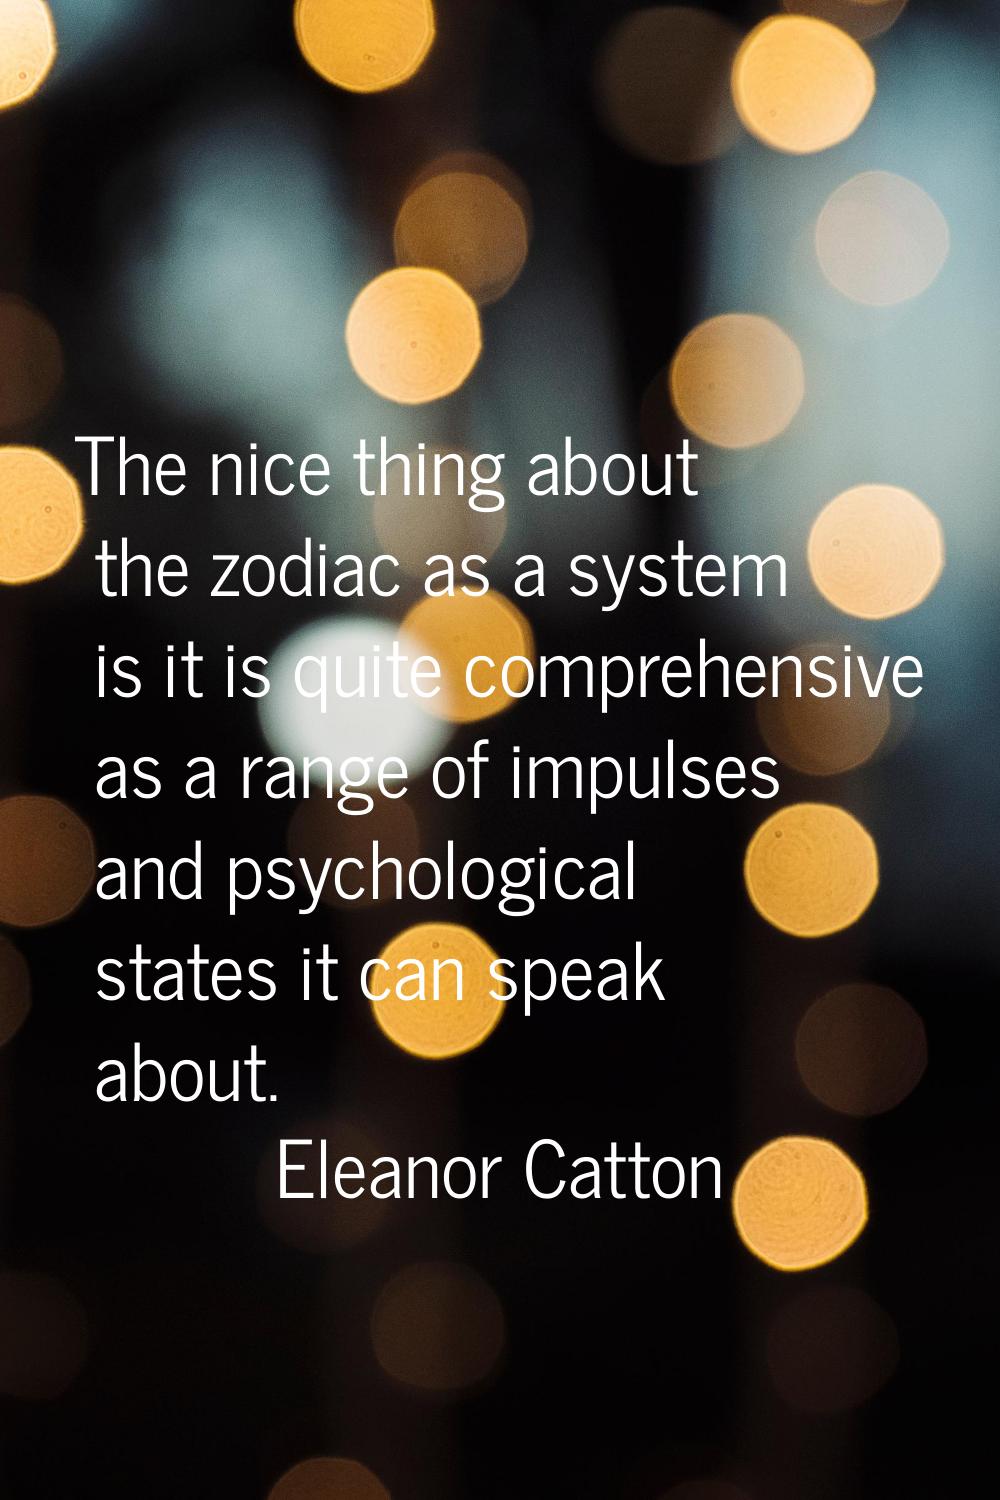 The nice thing about the zodiac as a system is it is quite comprehensive as a range of impulses and